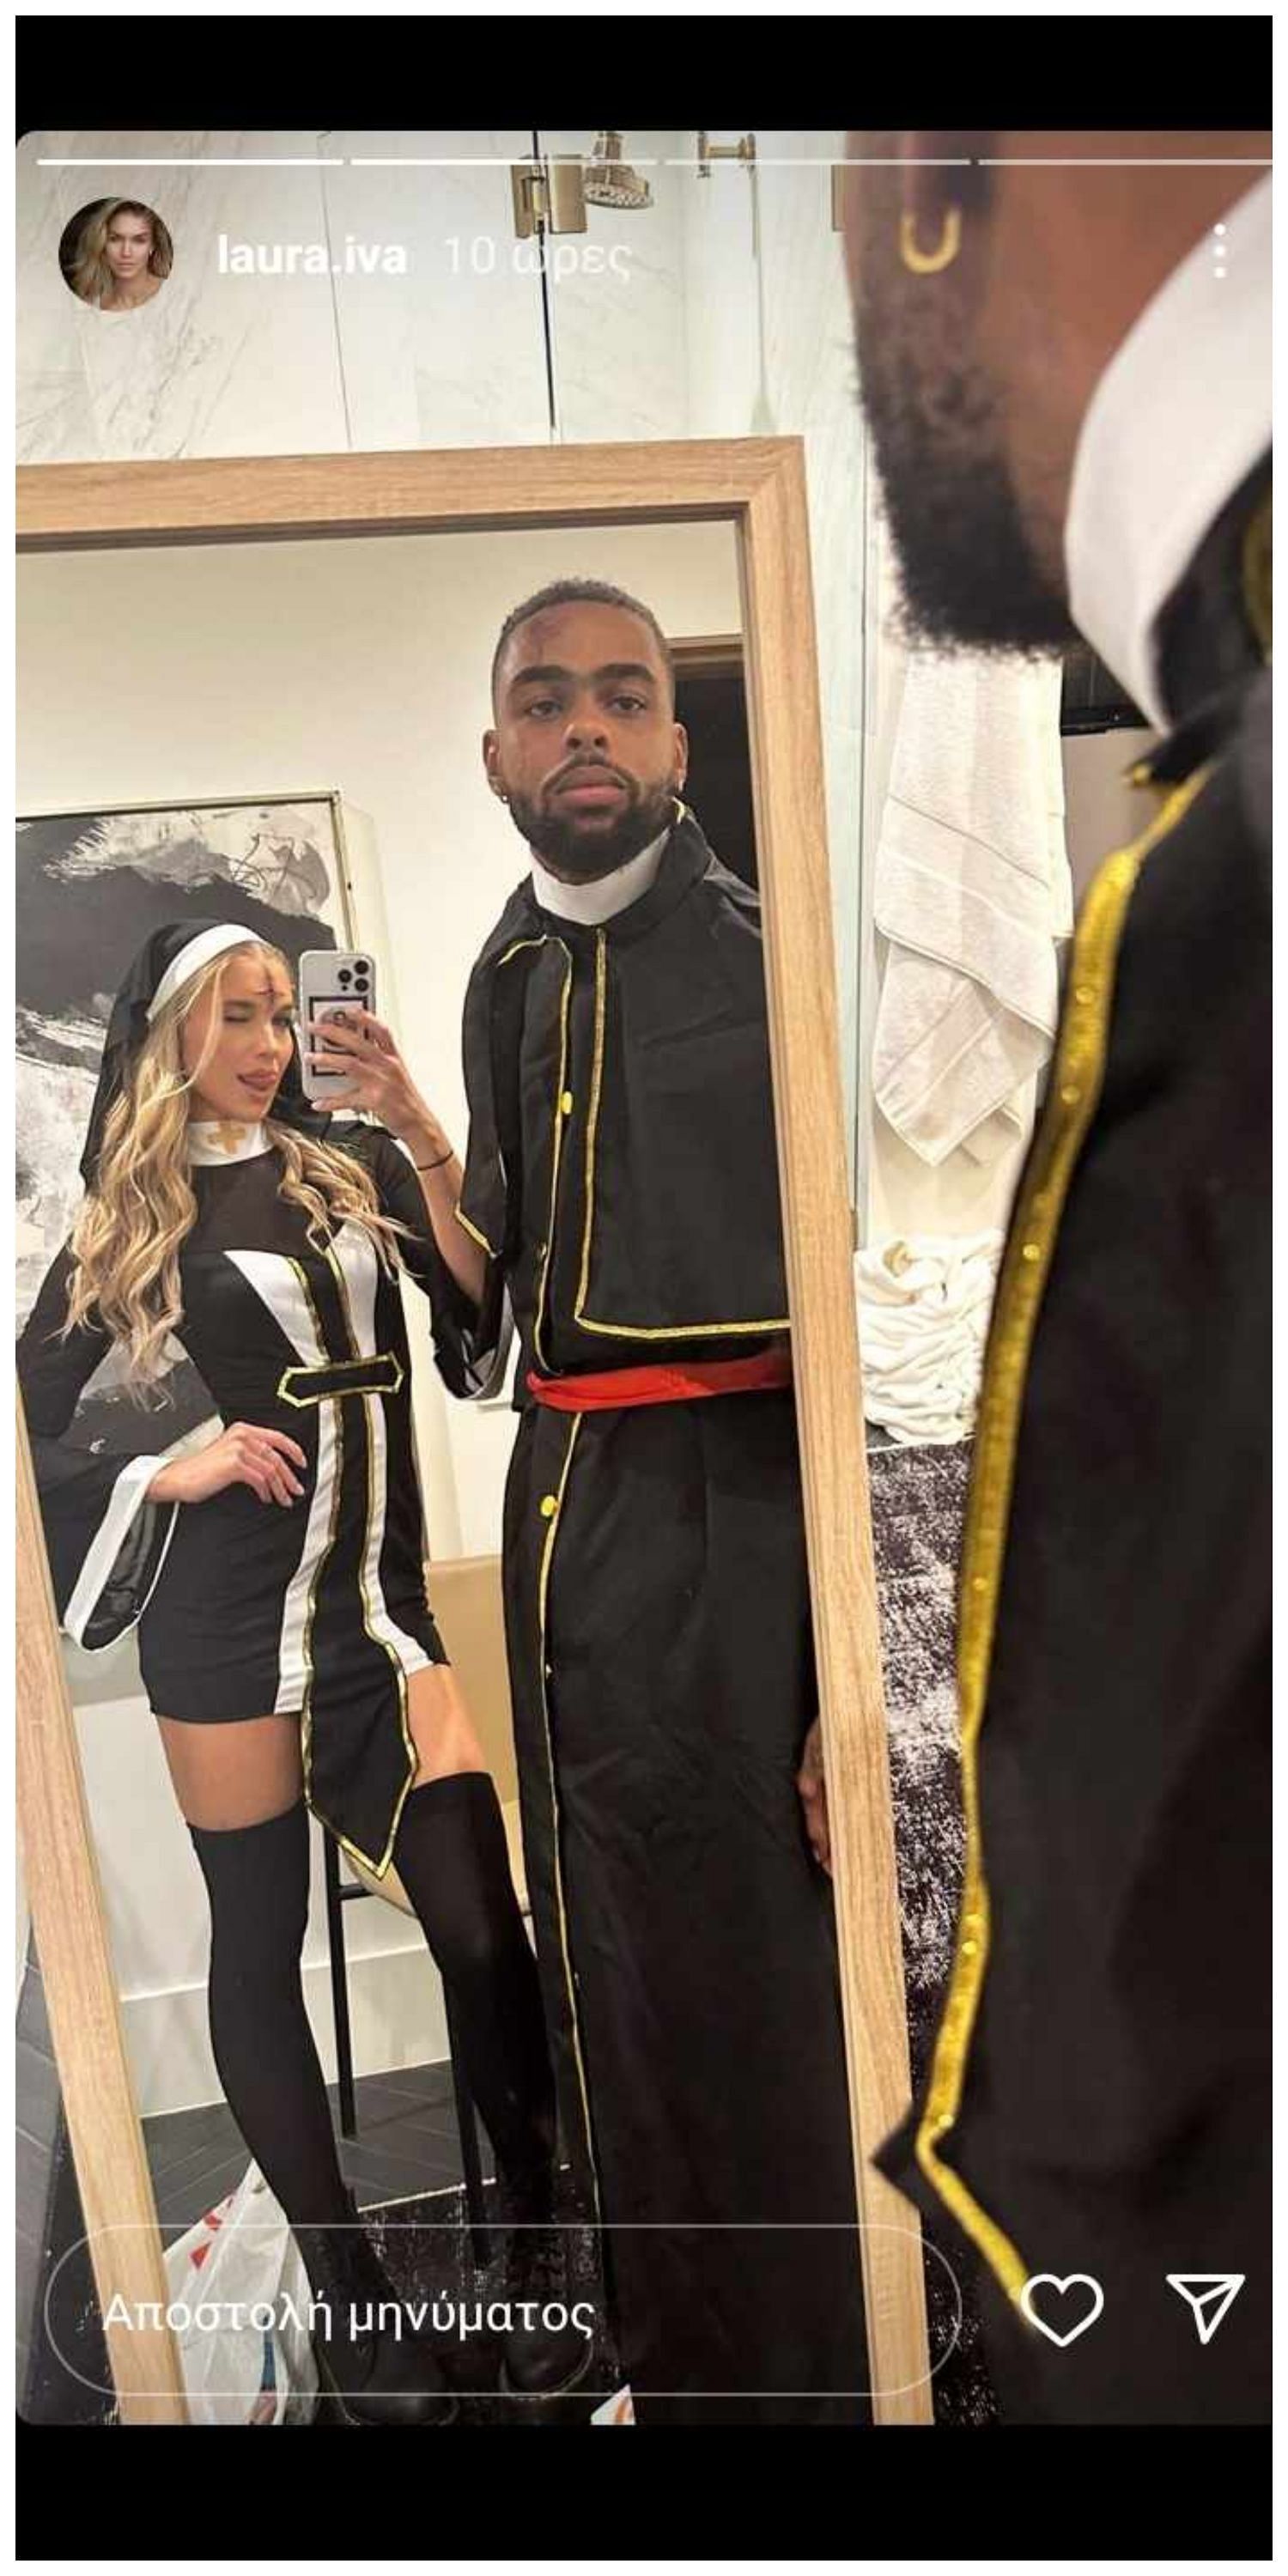 Russell and his girlfriend Laura during Halloween